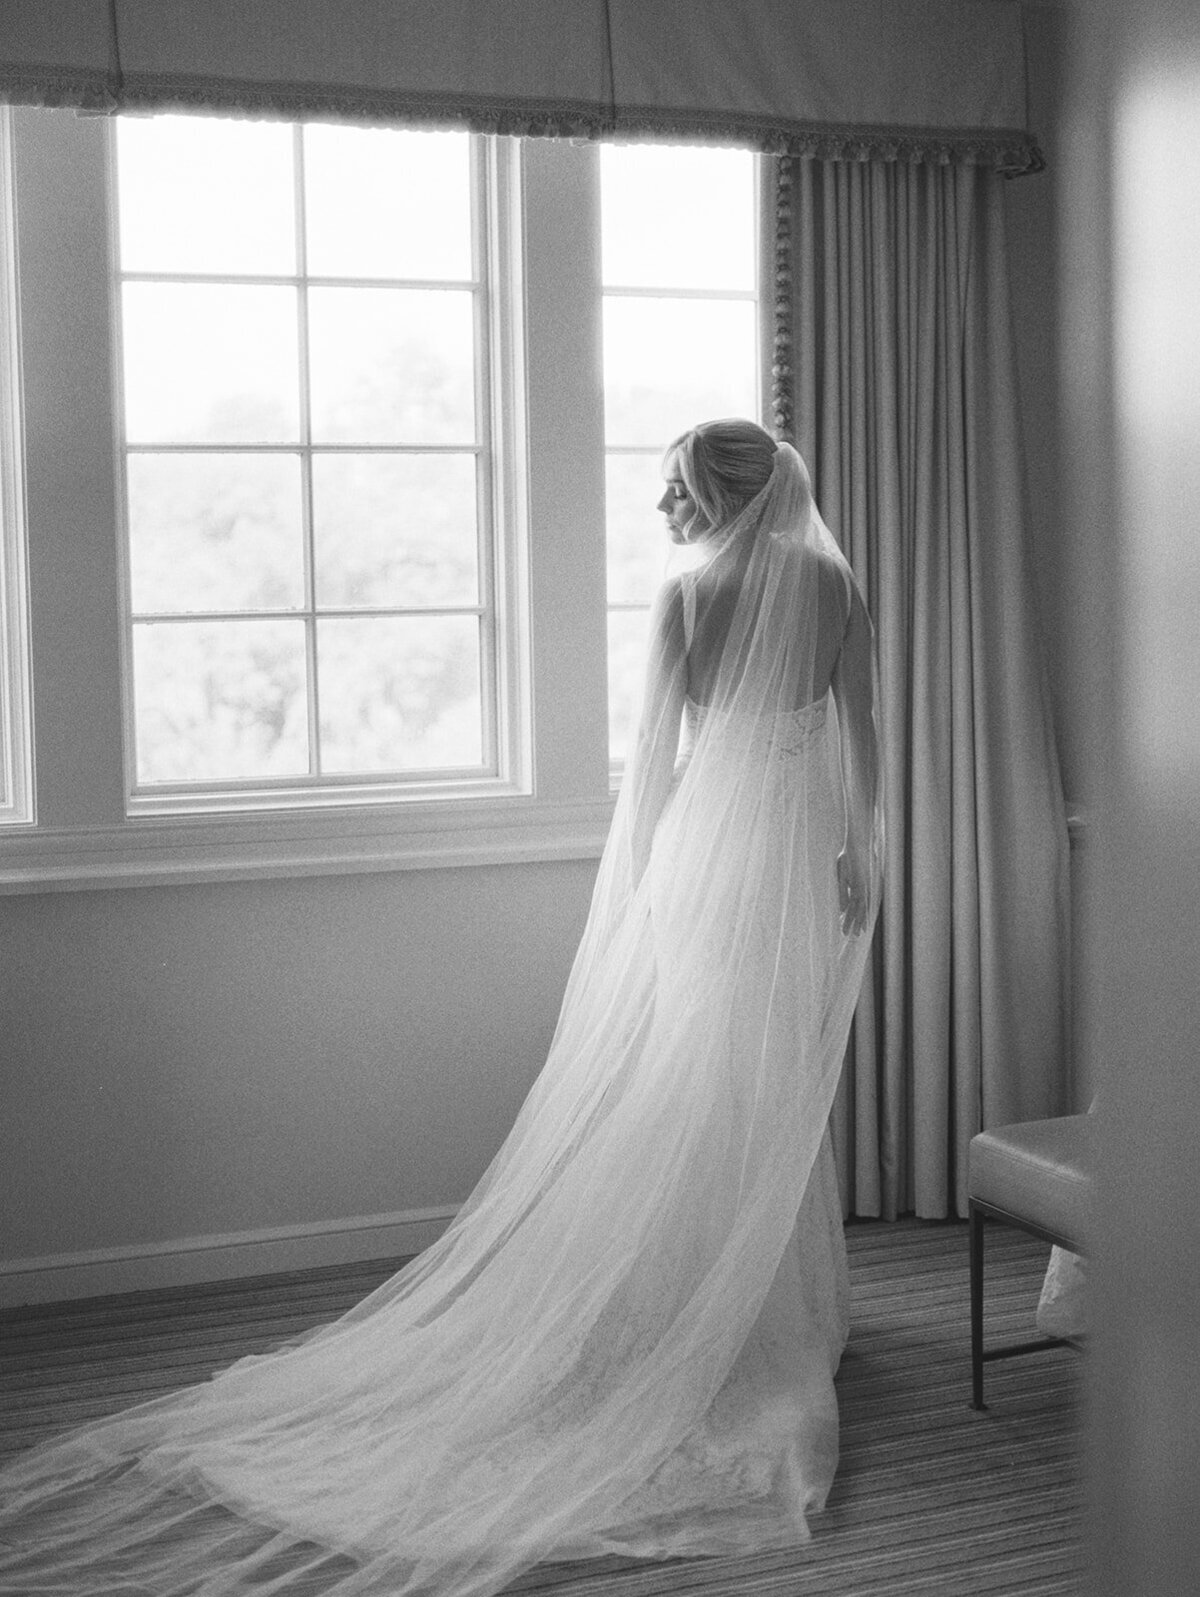 Bride looks over her shoulder as her veil is draped behind her  and the light illuminates her in this black and white film image